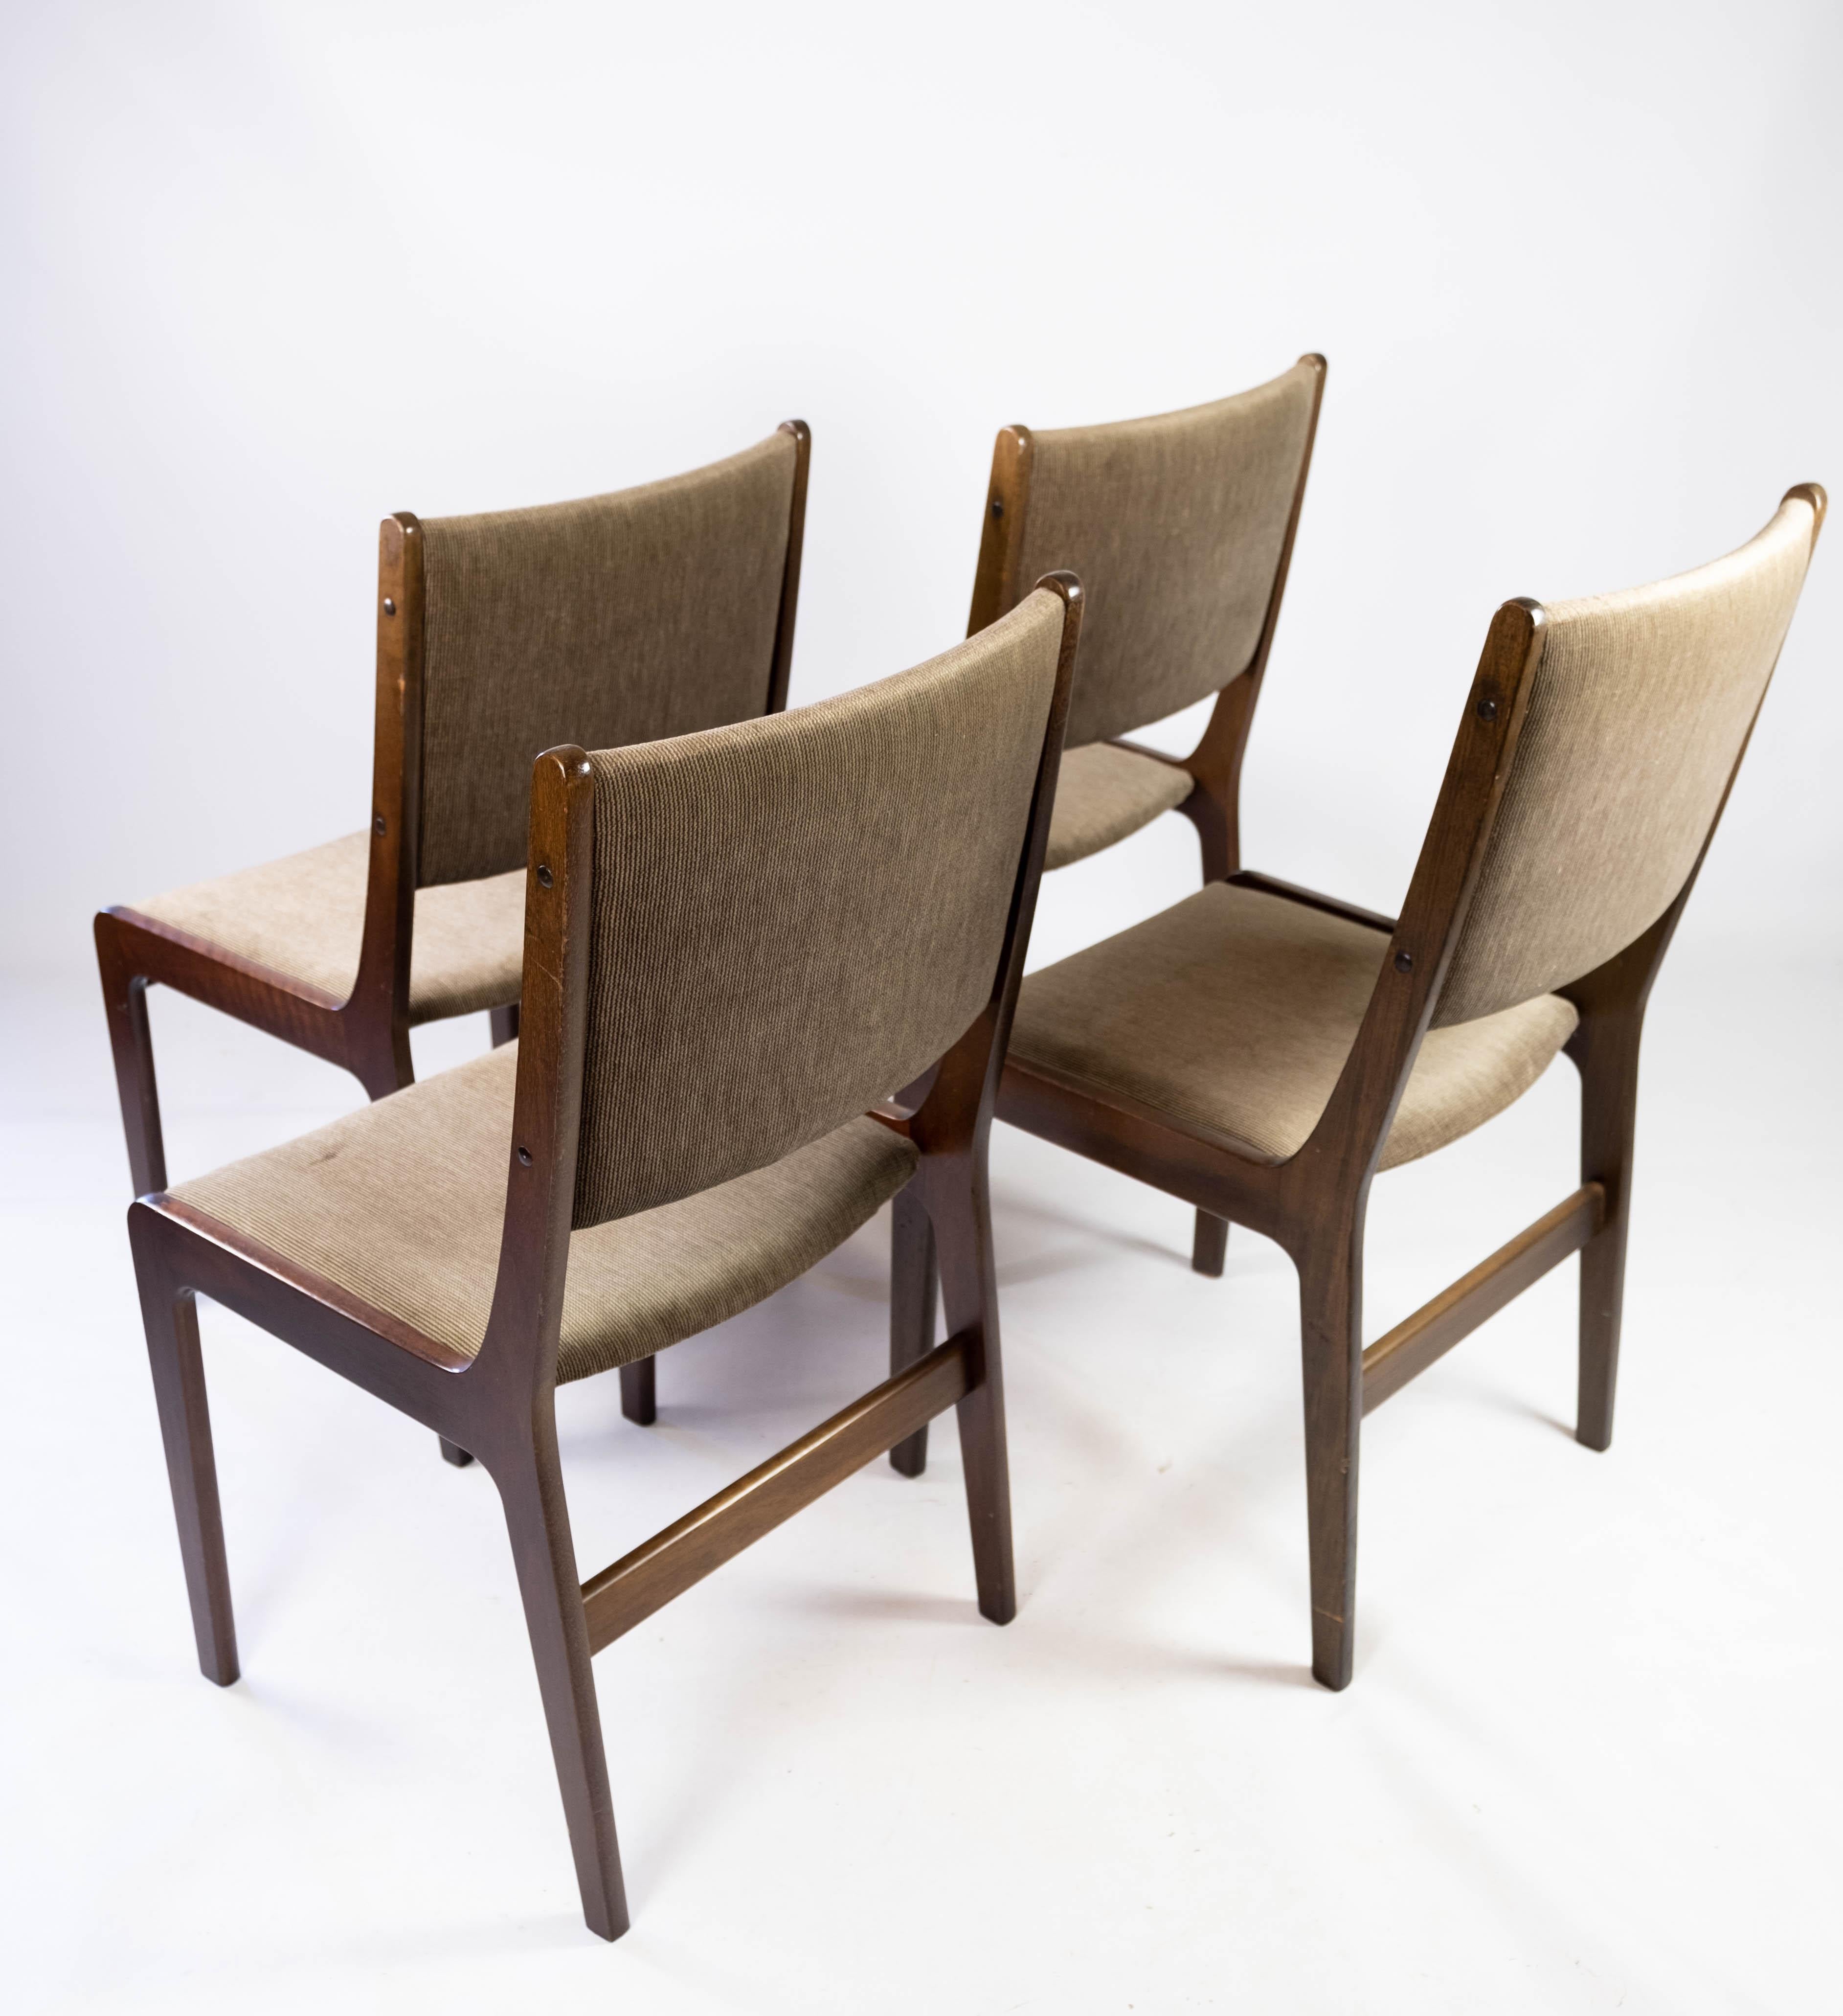 Fabric Set of Four Dining Room Chairs in Dark Wood of Danish Design by Faarstrup, 1960s For Sale